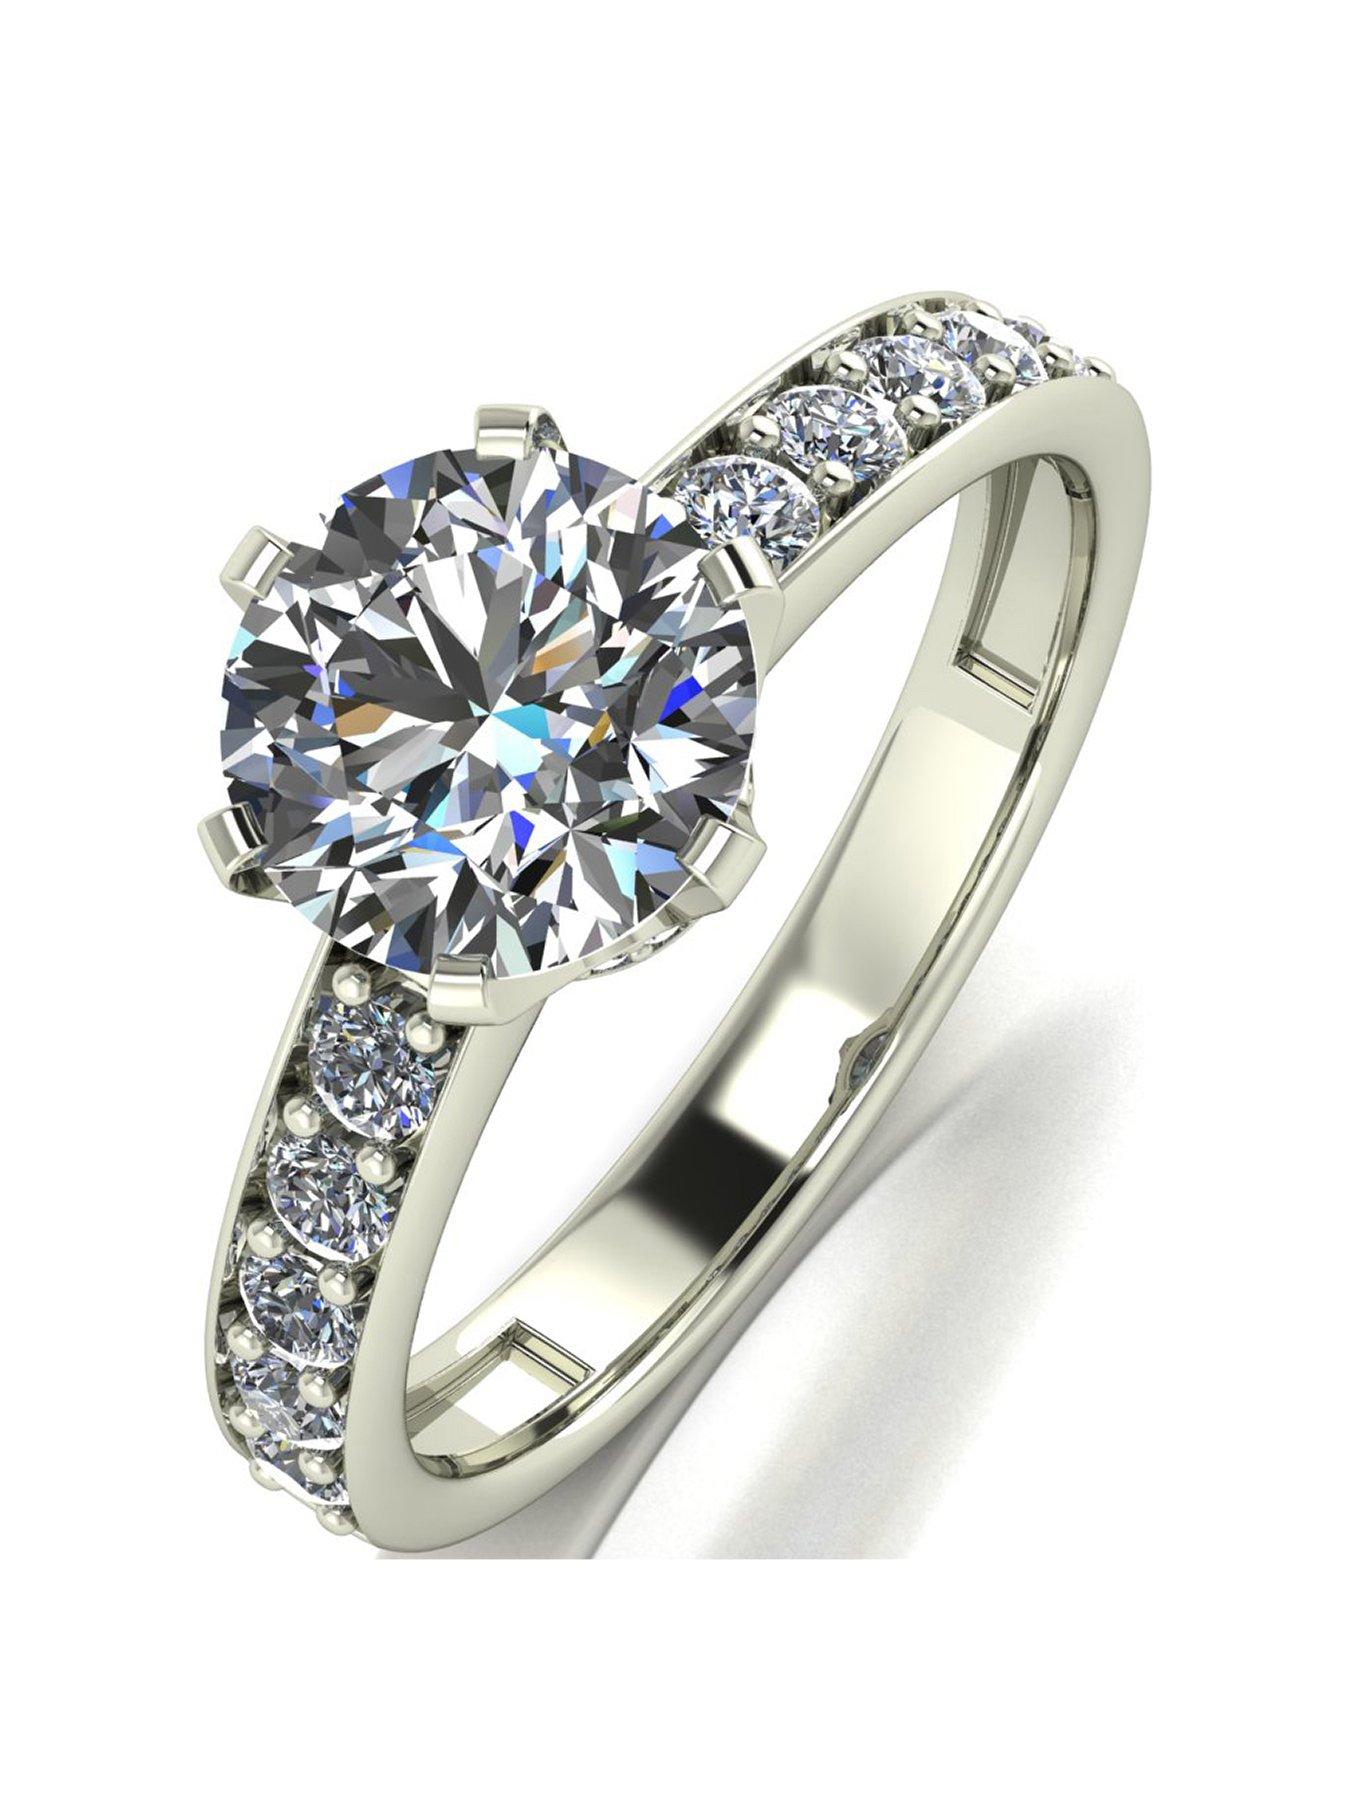 9ct White Gold | Rings | Gifts & jewellery | Moissanite | www.very